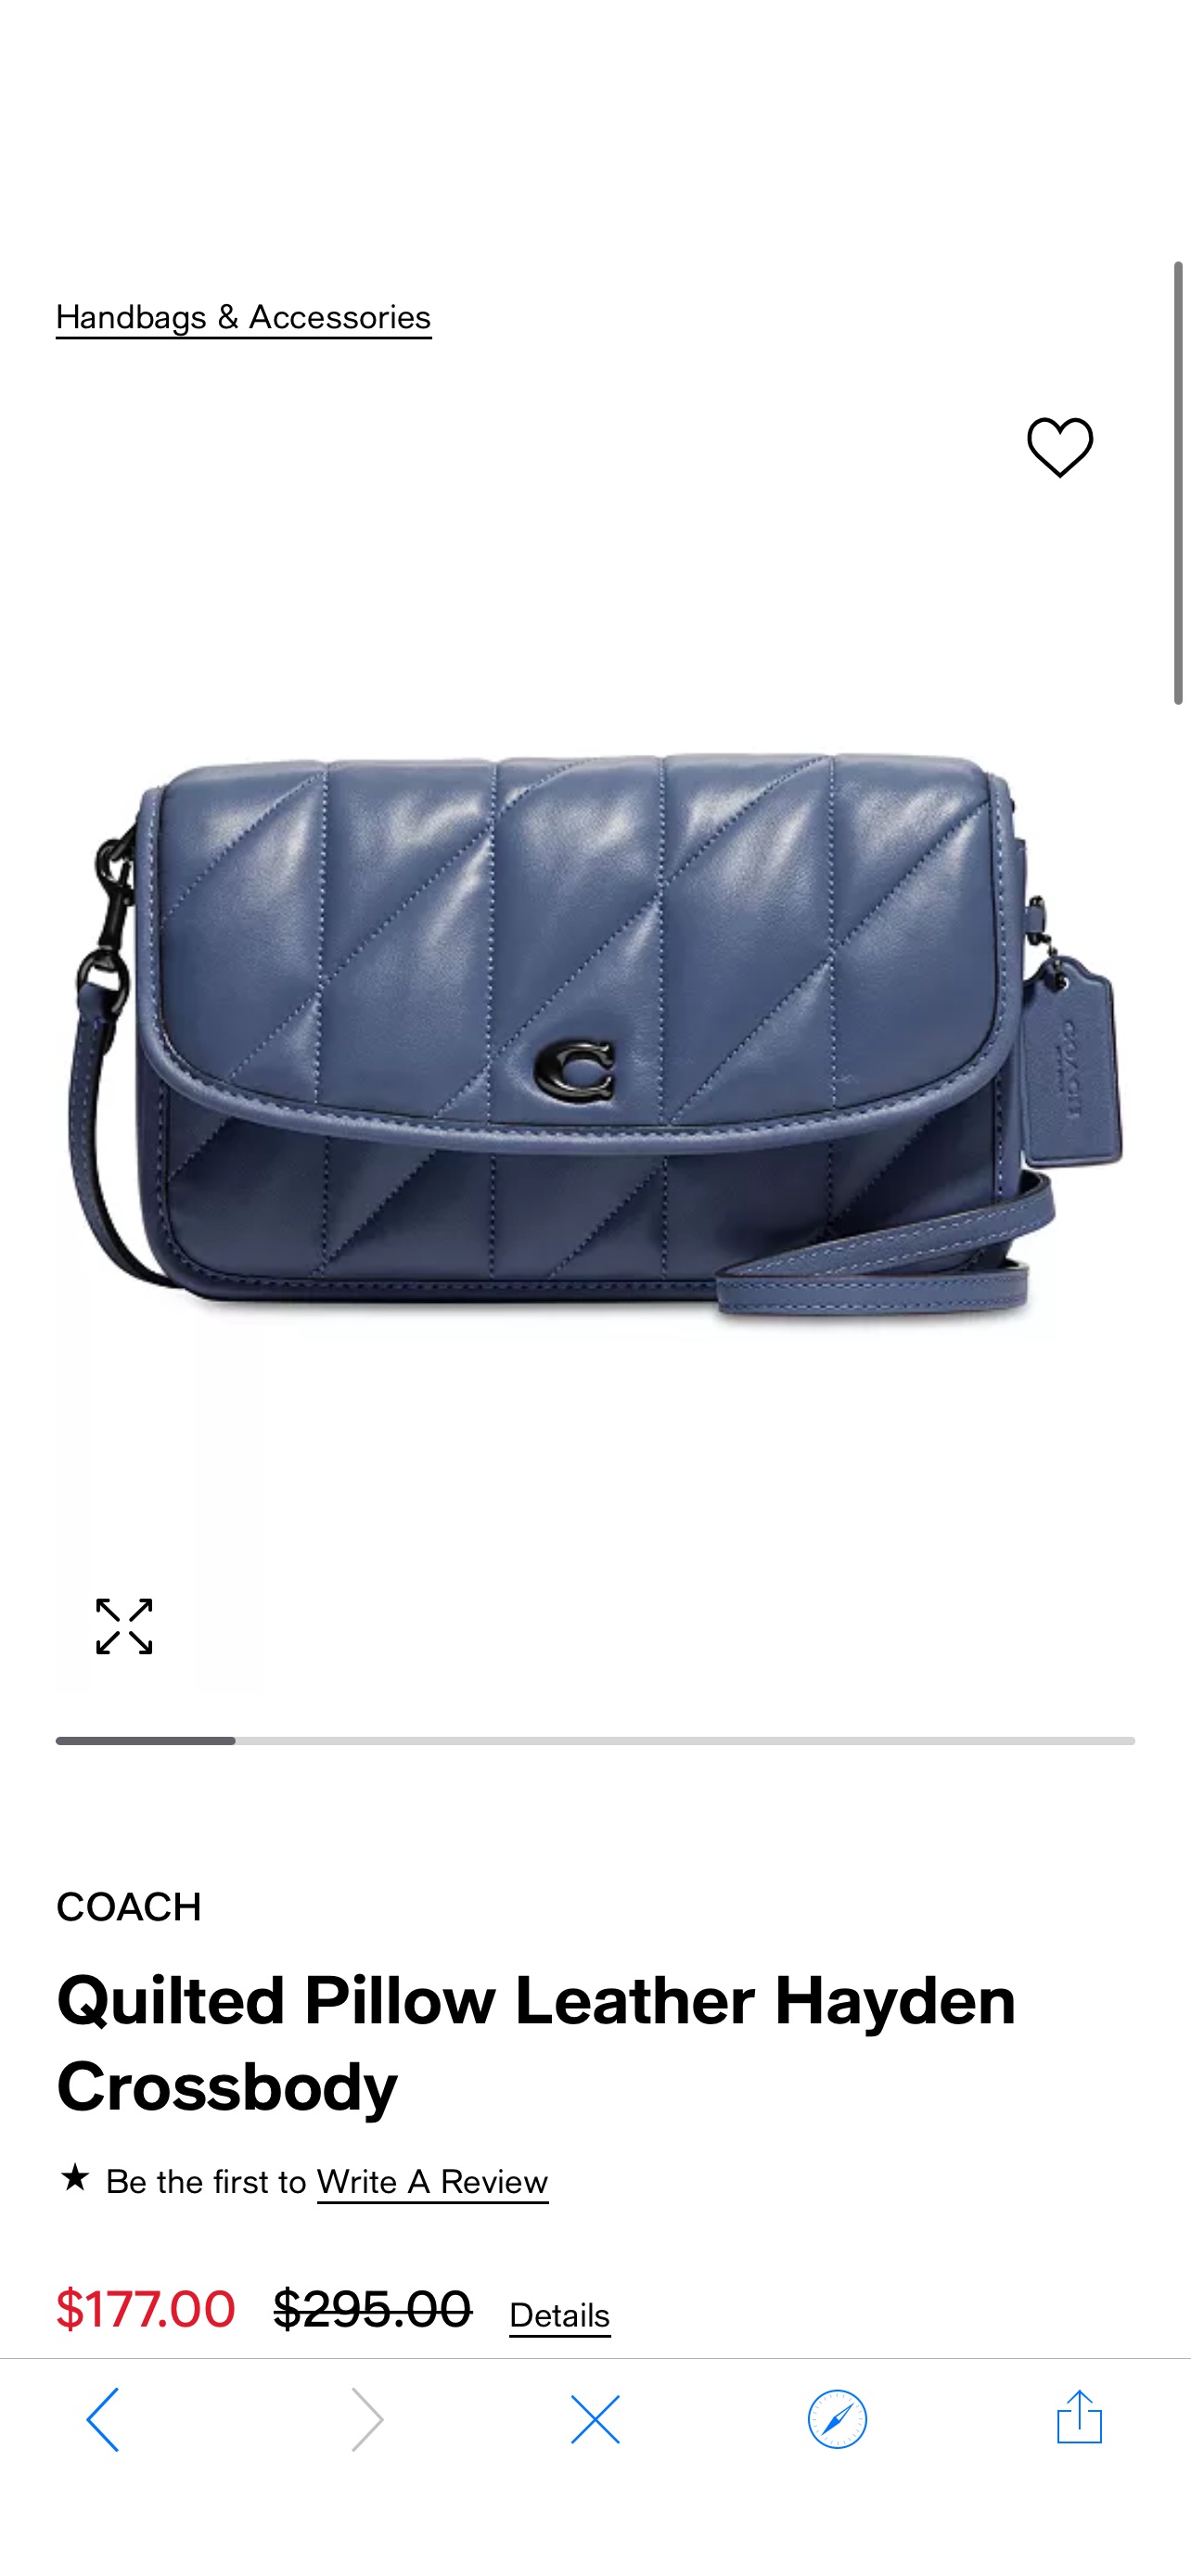 COACH Quilted Pillow Leather Hayden Crossbody & Reviews - Handbags & Accessories - Macy's